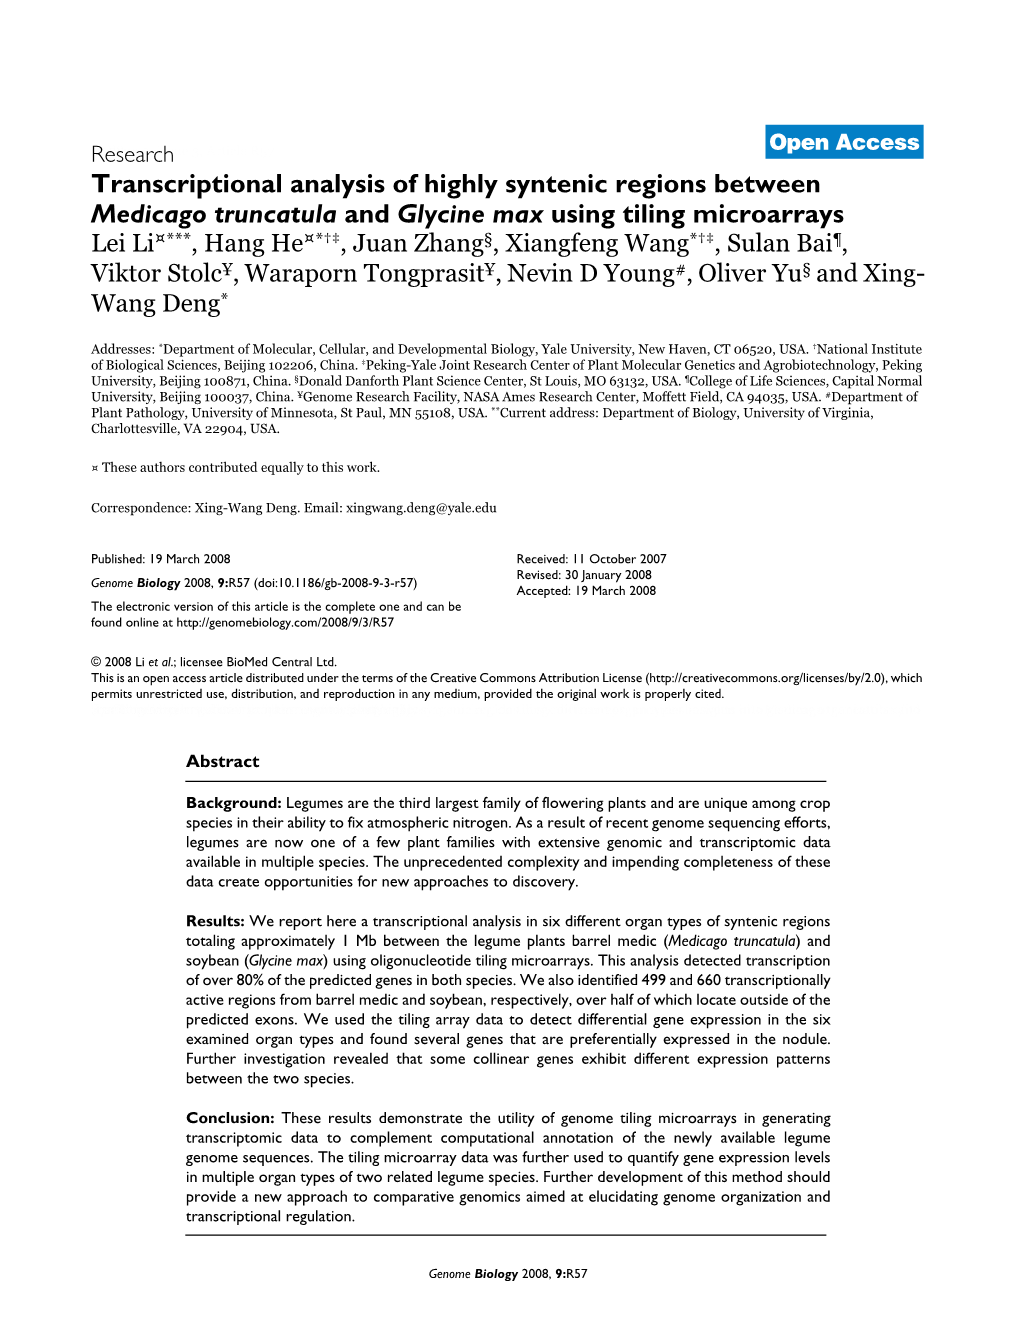 Transcriptional Analysis of Highly Syntenic Regions Between